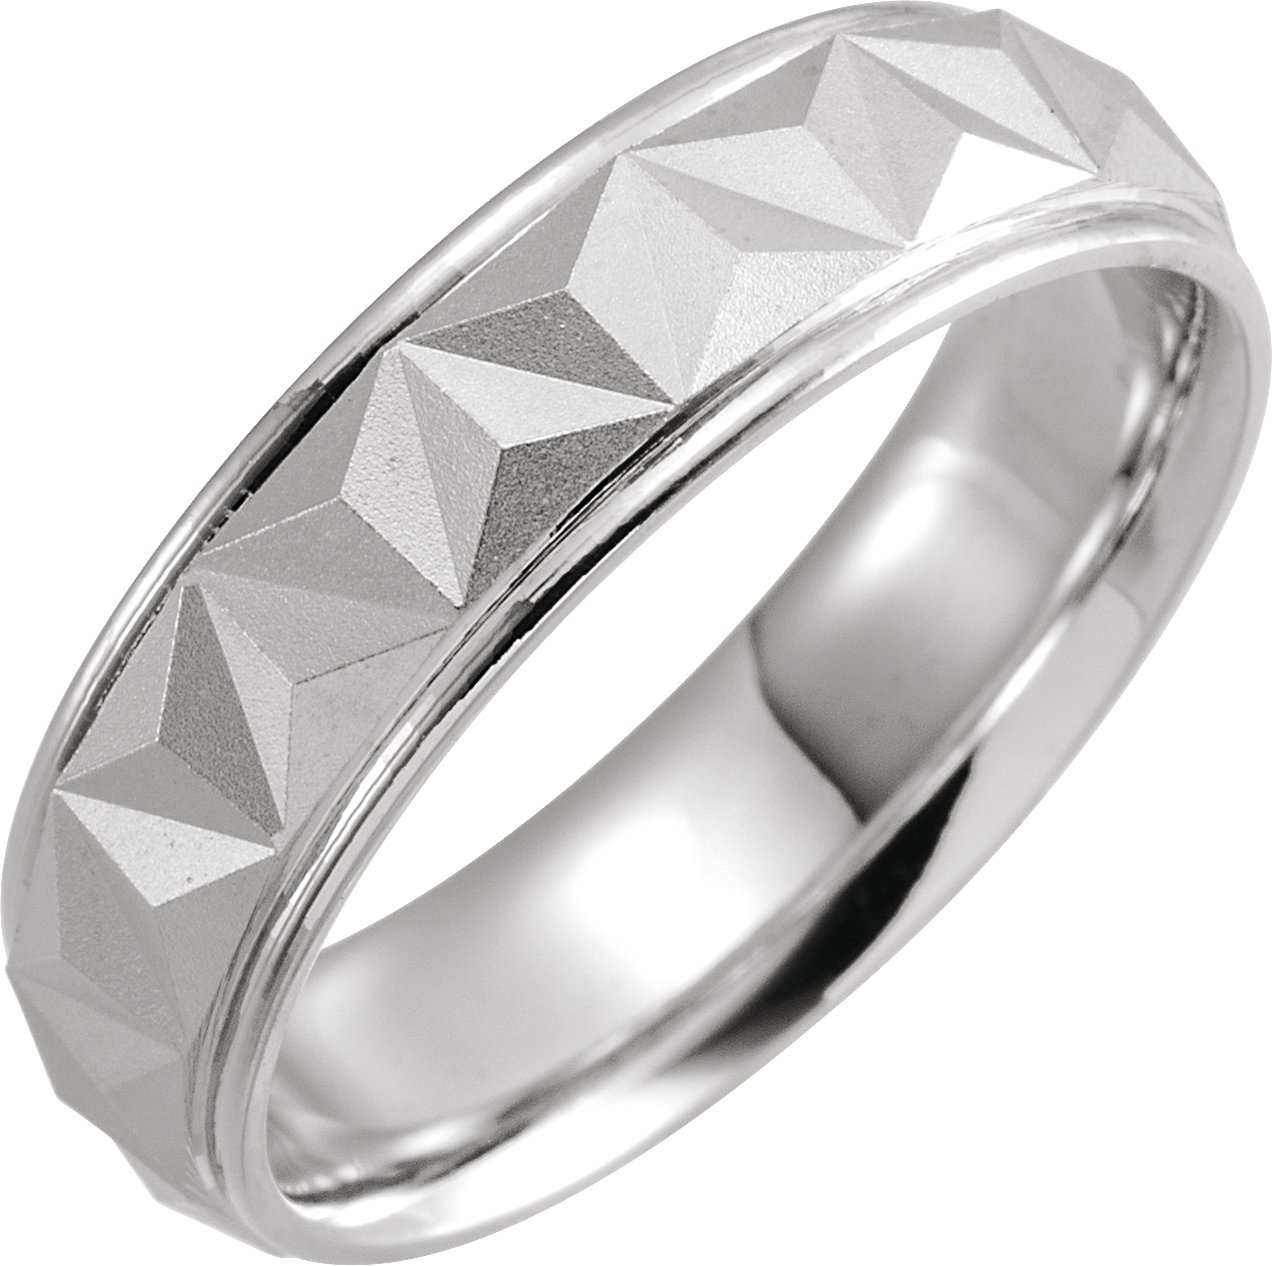 Continuum Sterling Silver 6 mm Geometric Band with Matte/Polished Finish Size 20